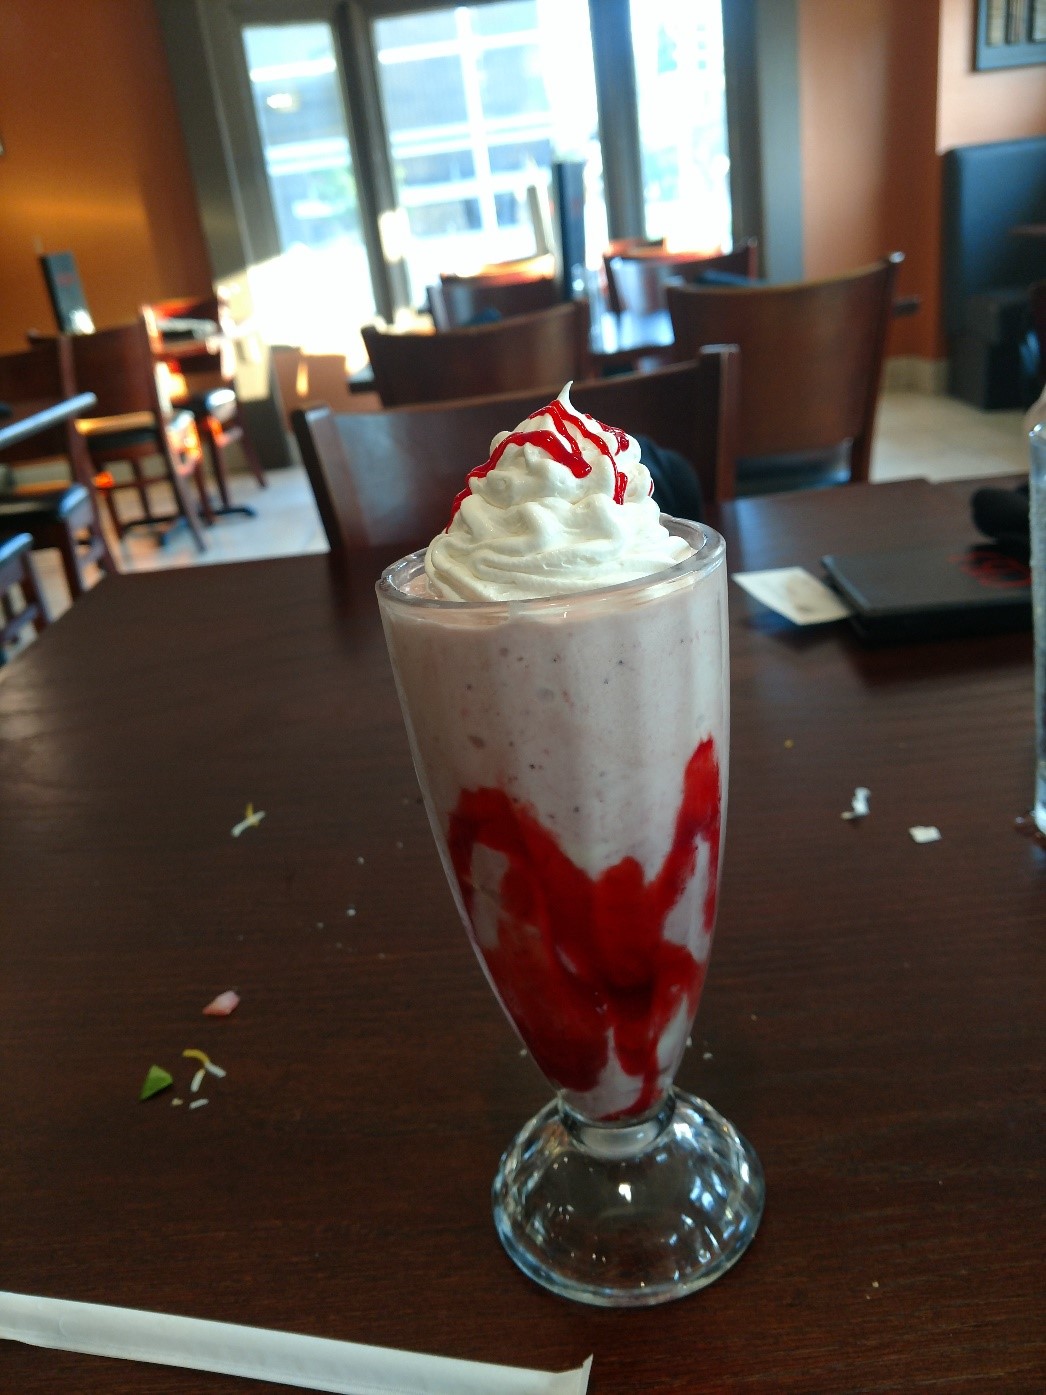 What kind of celebration would be complete without a strawberry shake in honor of Sheri’s Father Charlie, 7-18.